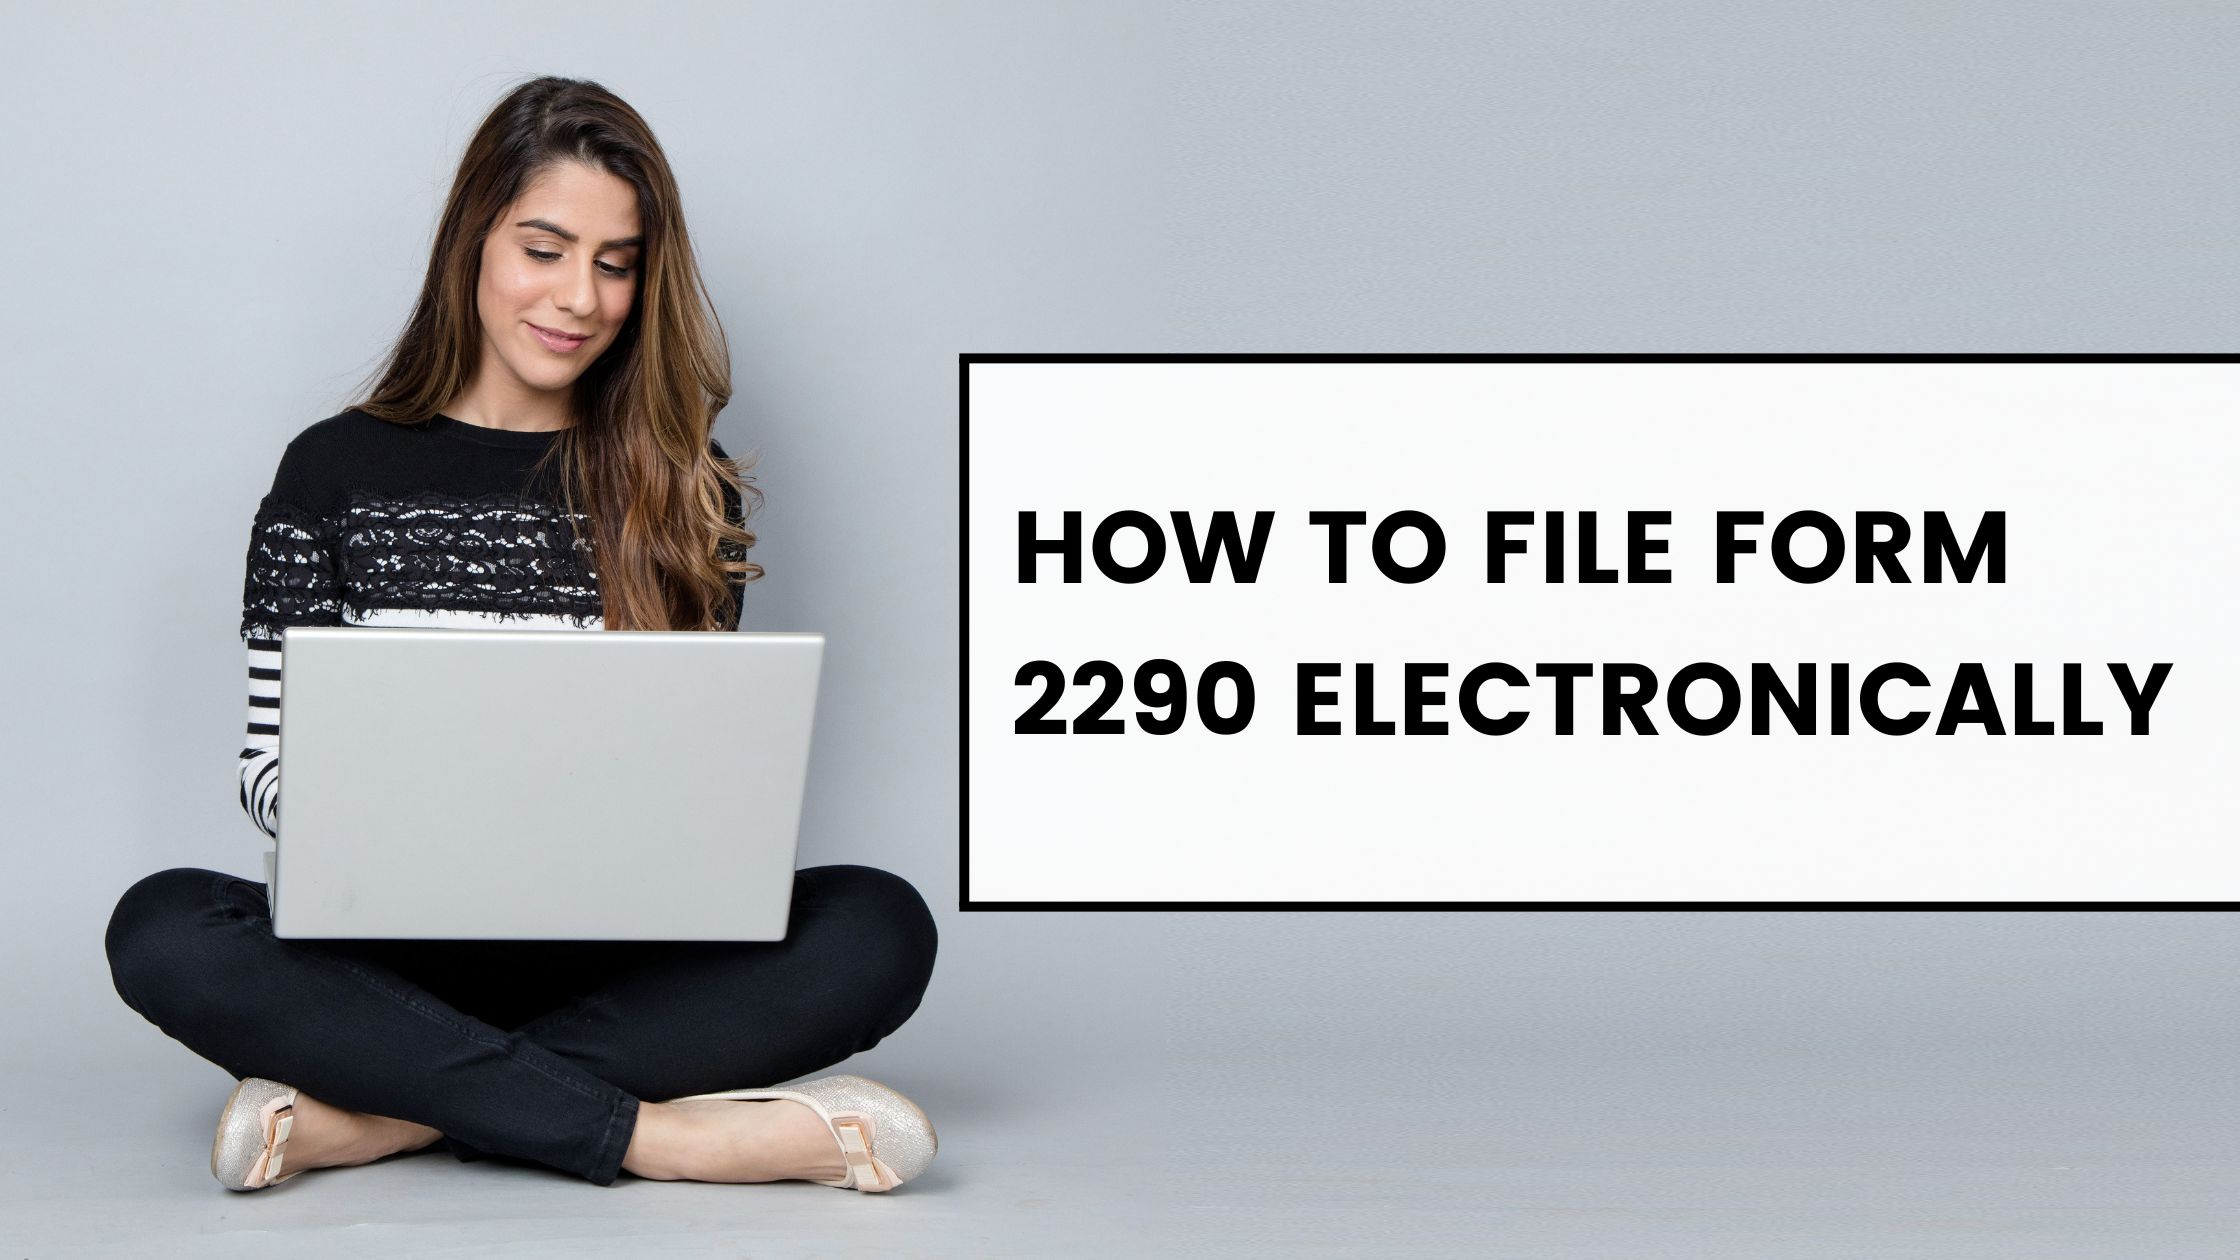 HOW TO FILE FORM 2290 ELECTRONICALLY